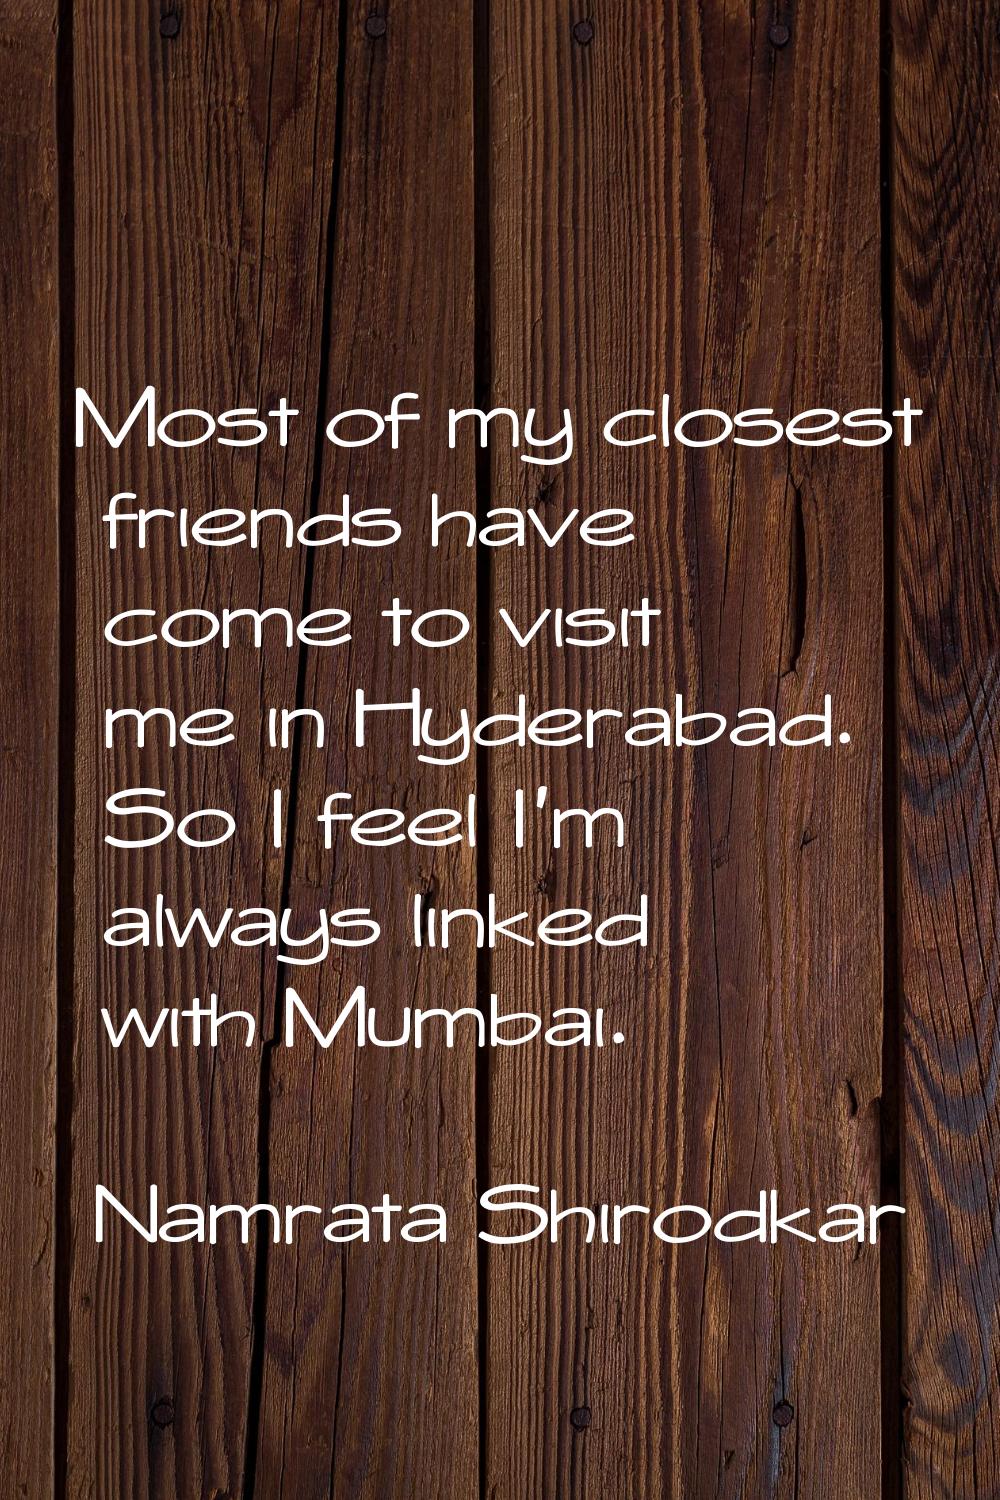 Most of my closest friends have come to visit me in Hyderabad. So I feel I'm always linked with Mum